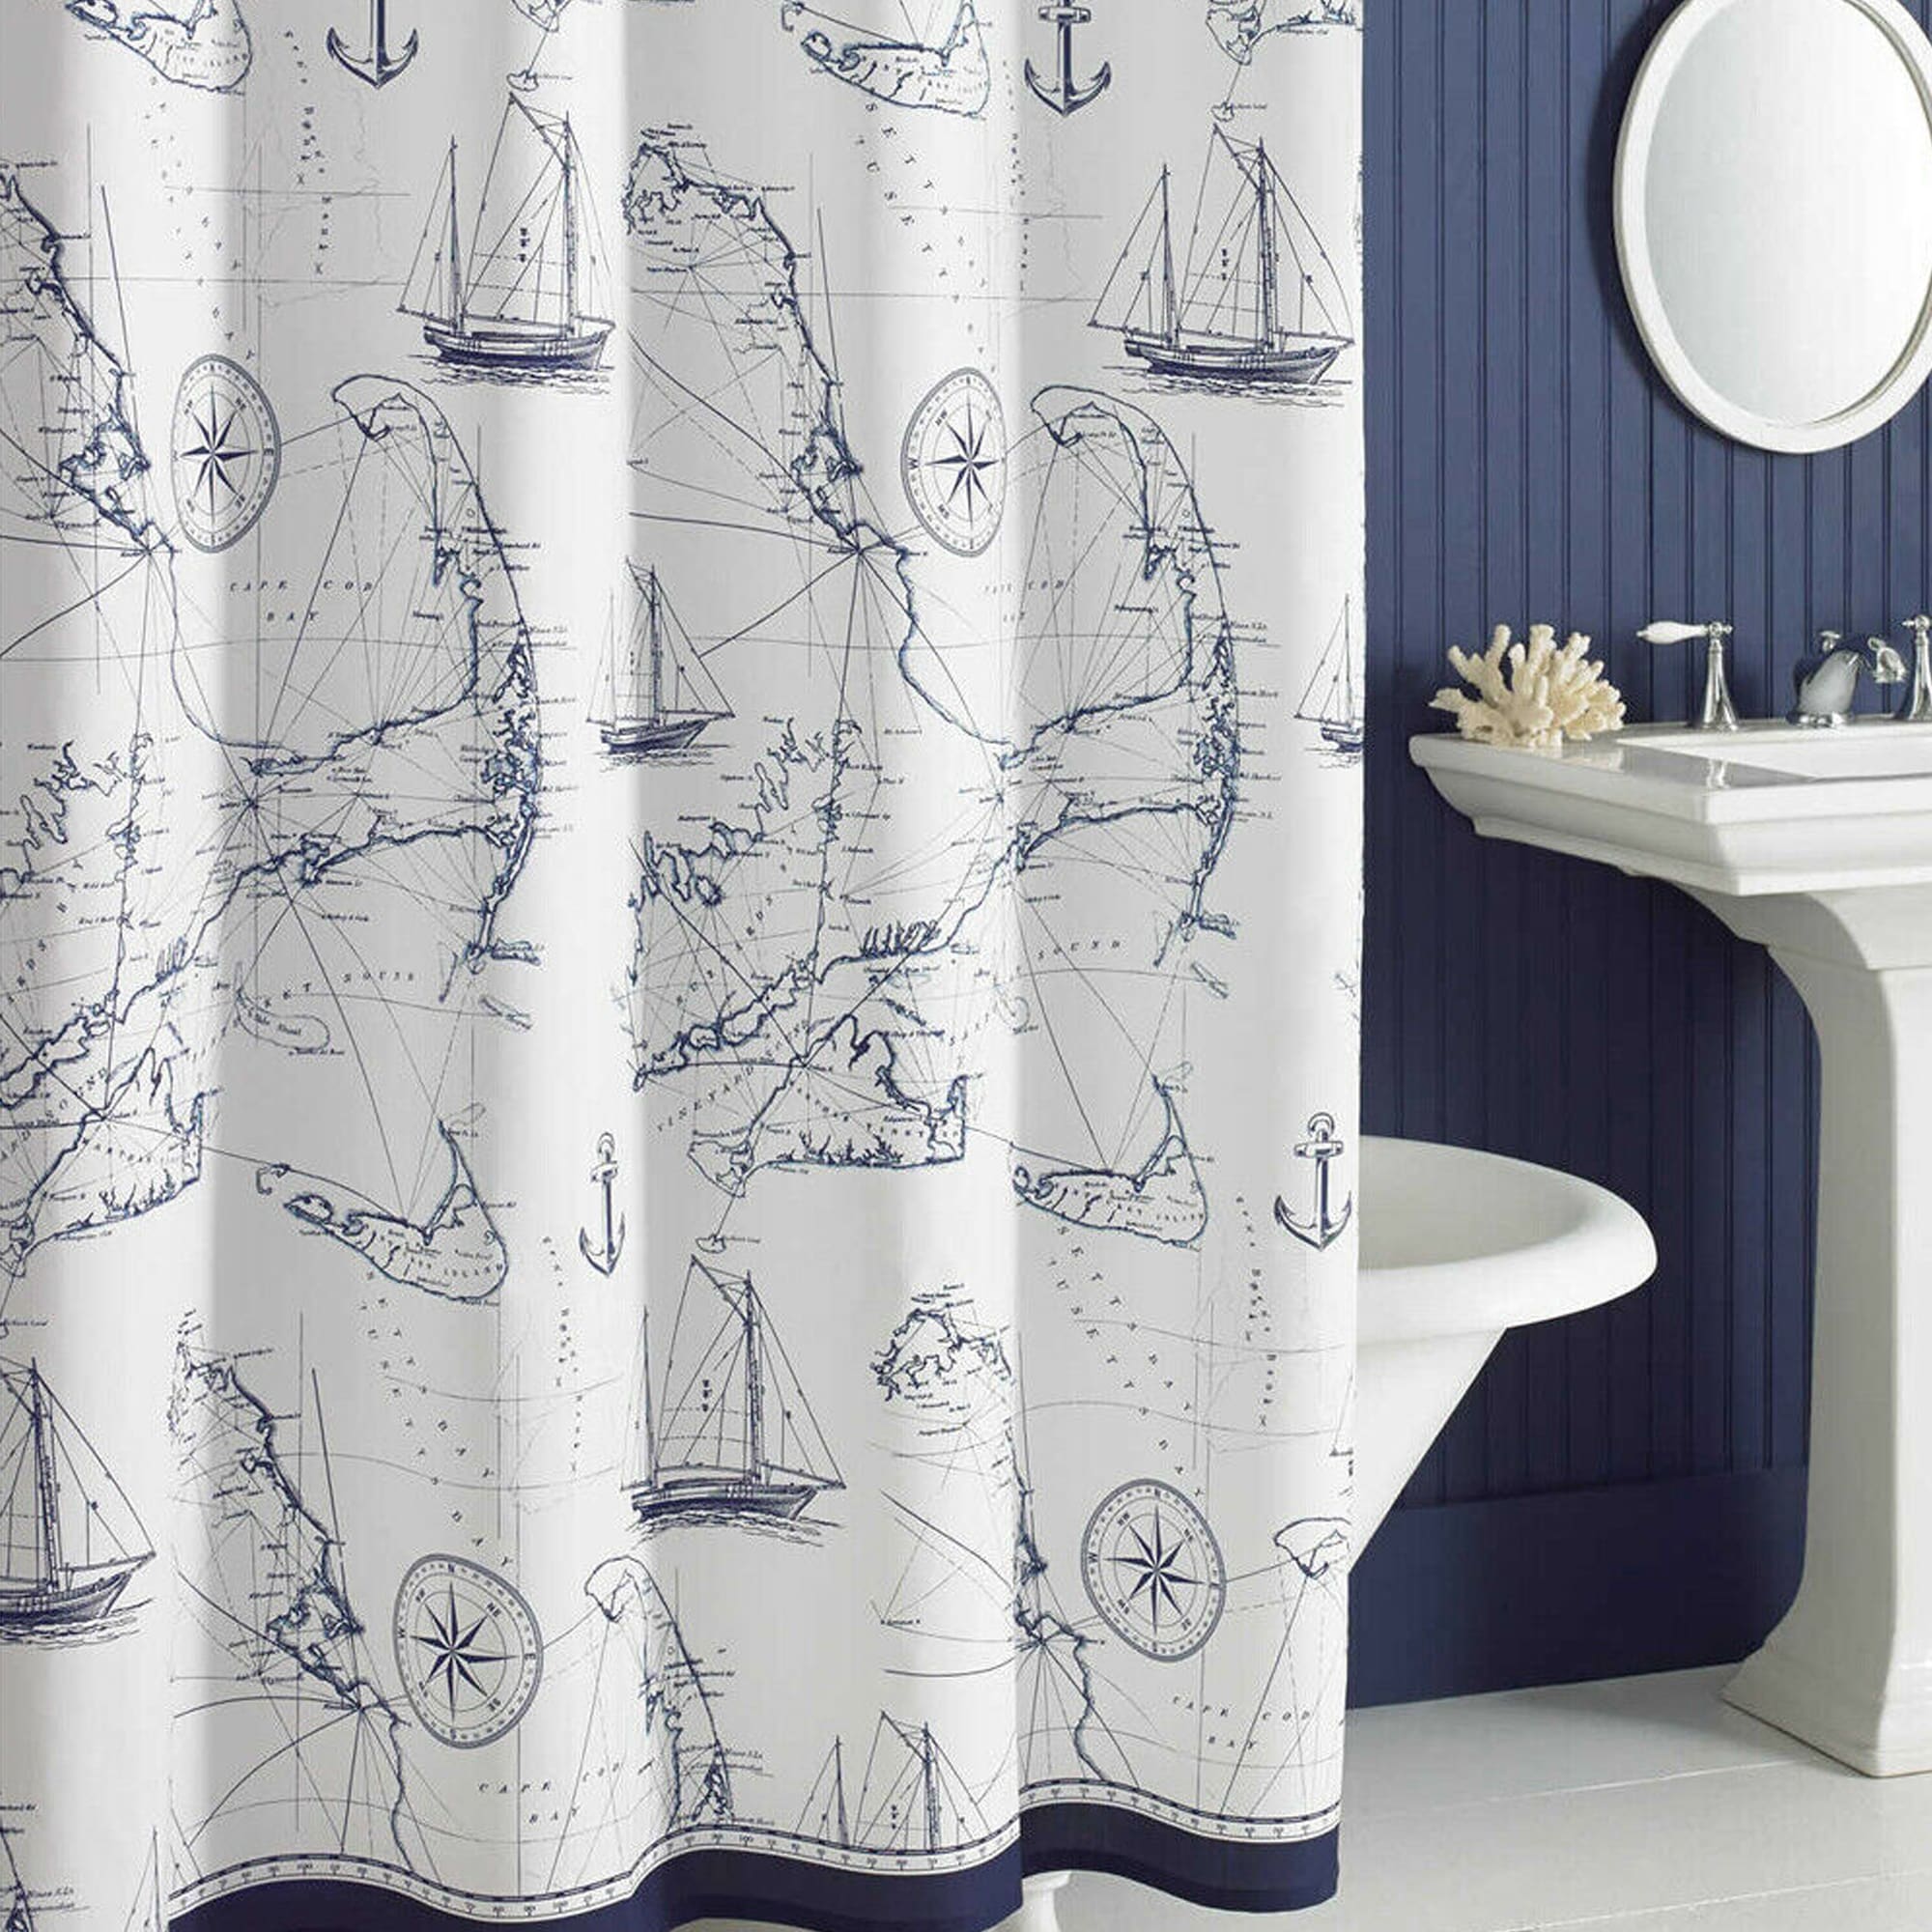 https://ak1.ostkcdn.com/images/products/is/images/direct/e982fb8d57357420be55d303182a1efb23ad5f09/Polyester-Sea-and-Shell-Shower-Curtain-62%22-x-72%22-Aviation-SC.jpg